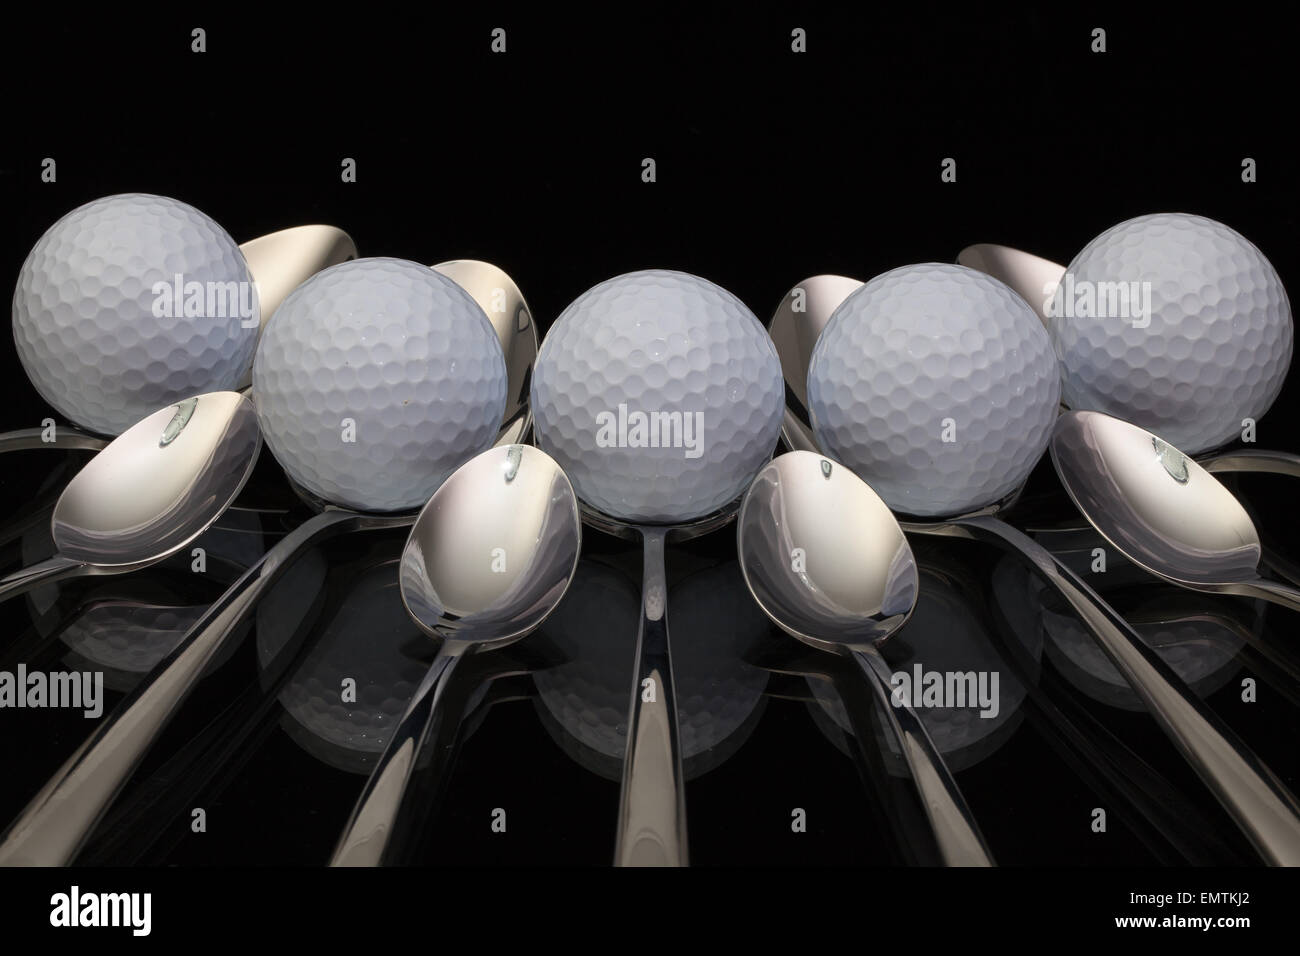 Golf Balls And Nine Spoons On A Black Glass Desk Stock Photo